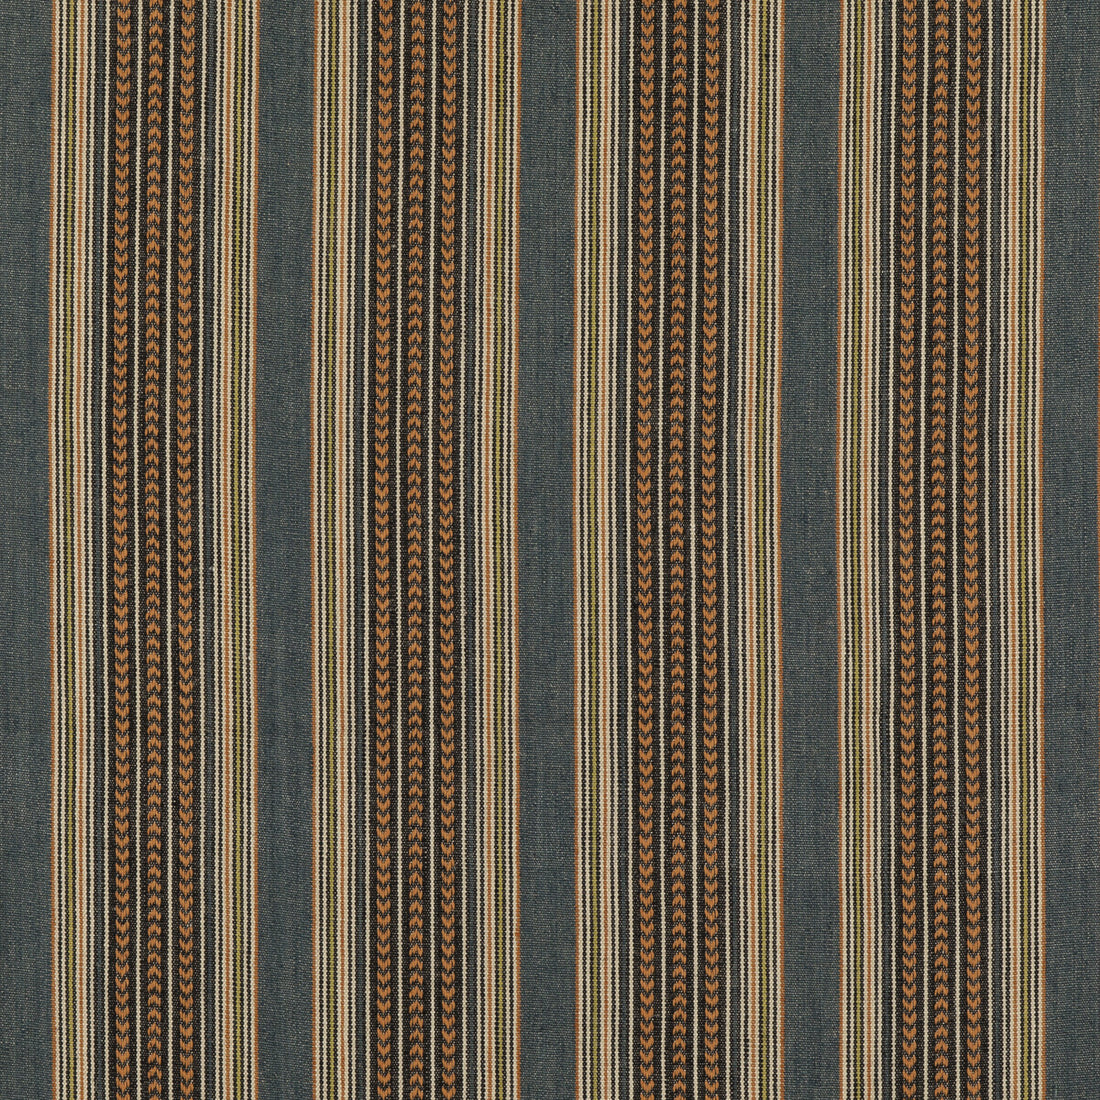 Berber Stripe fabric in denim color - pattern FD792.G34.0 - by Mulberry in the Mulberry Stripes II collection